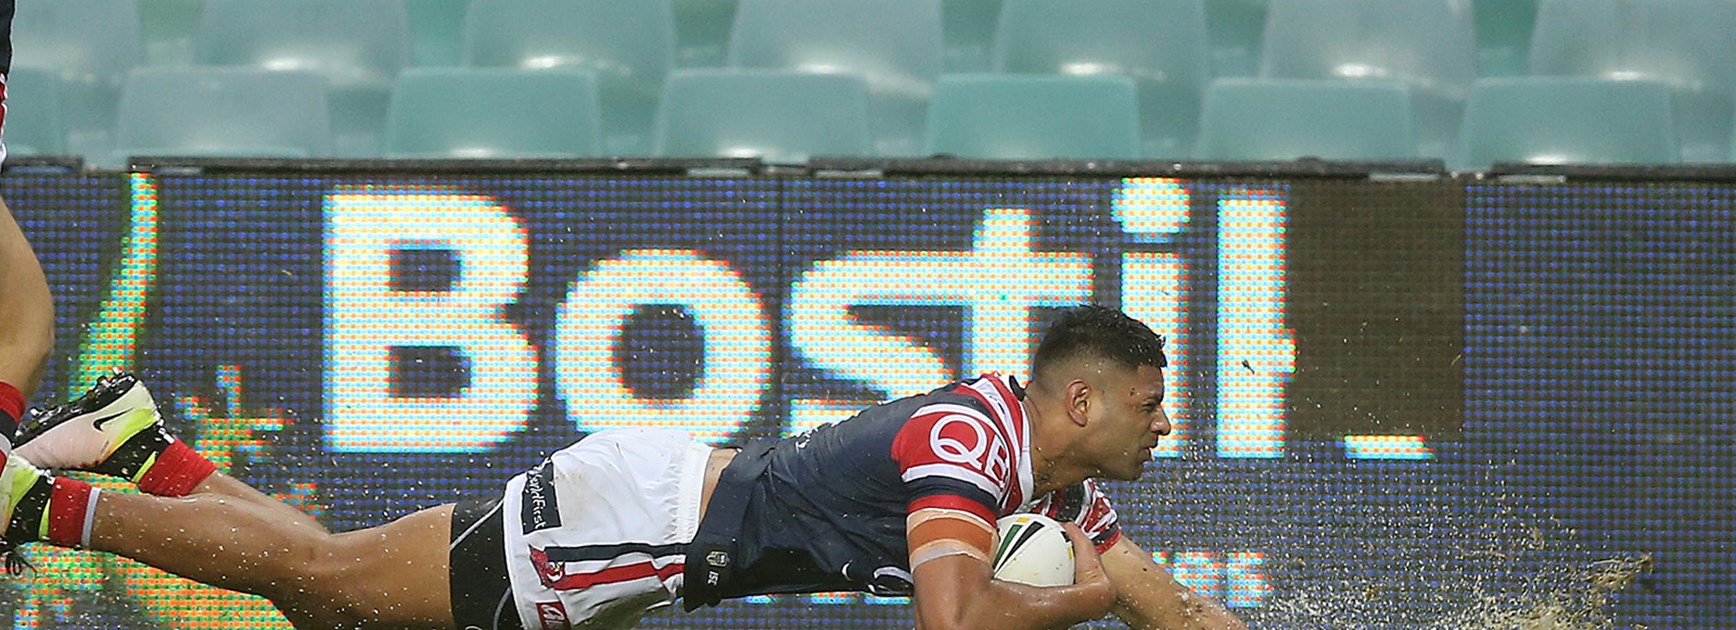 Daniel Tupou splashes over for the Roosters against the Wests Tigers at a wet Allianz Stadium.